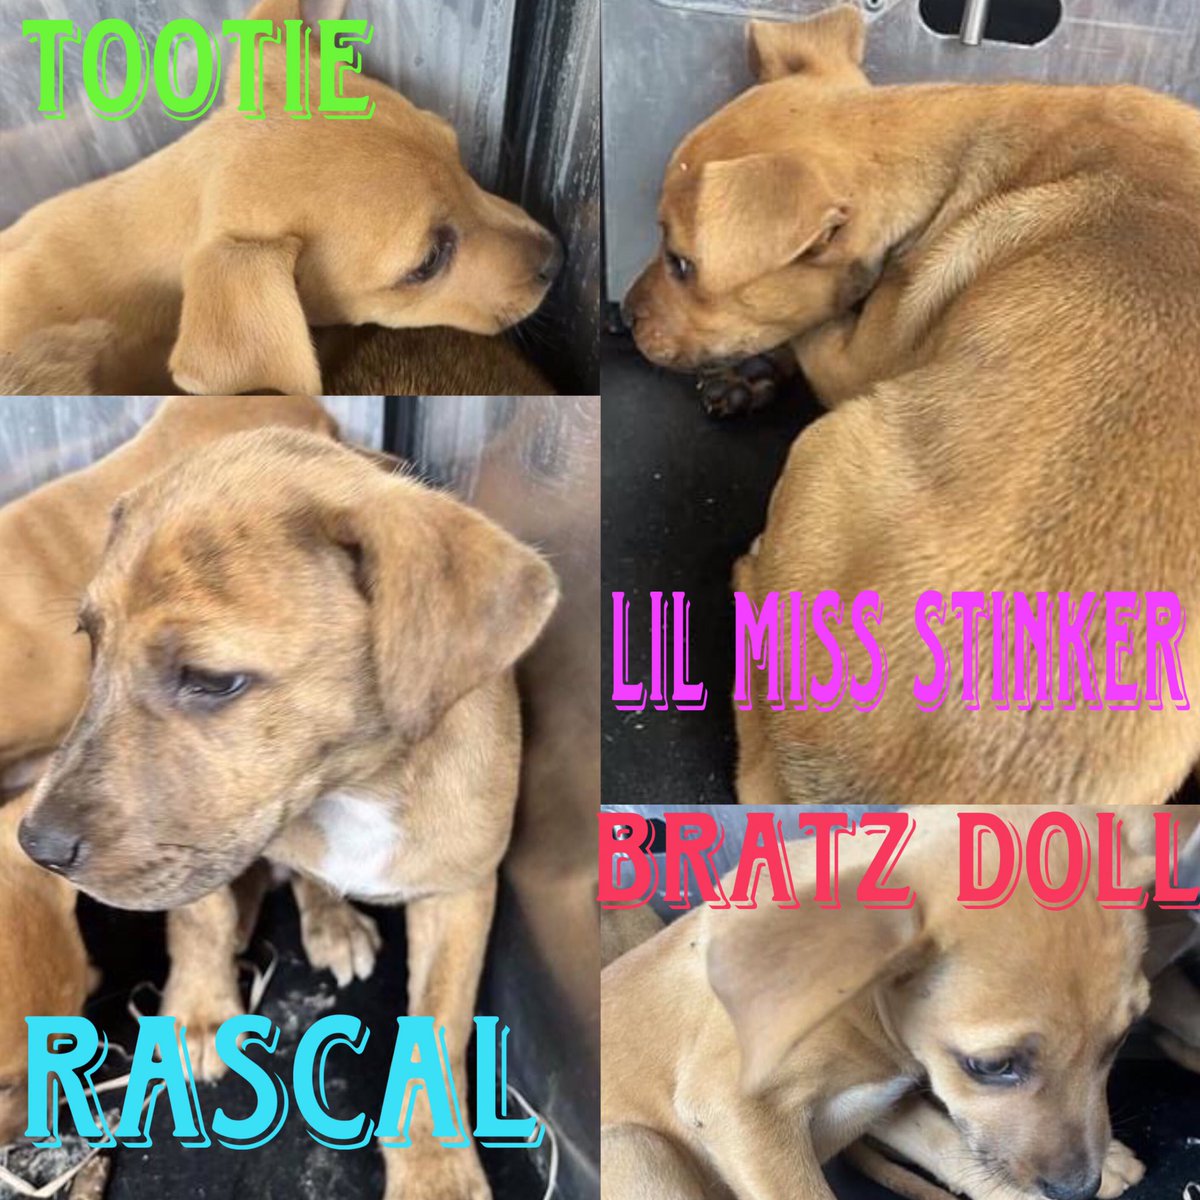 🆘 THESE 3 MTHS OLD PUPPIES ARE TO BE KILLED ☠️ TODAY 5.9 BY SAN ANTONIO ACS #TEXAS‼️ Terriers RASCAL #A712245 M TOOTIE #A712246 F BRATZ DOLL #A712247 F LIL MISS STINKER #A712248 F #Foster / #AdoptDontShop ☎️2102074738 #DogLovers #PledgeForRescue 🙏🏼